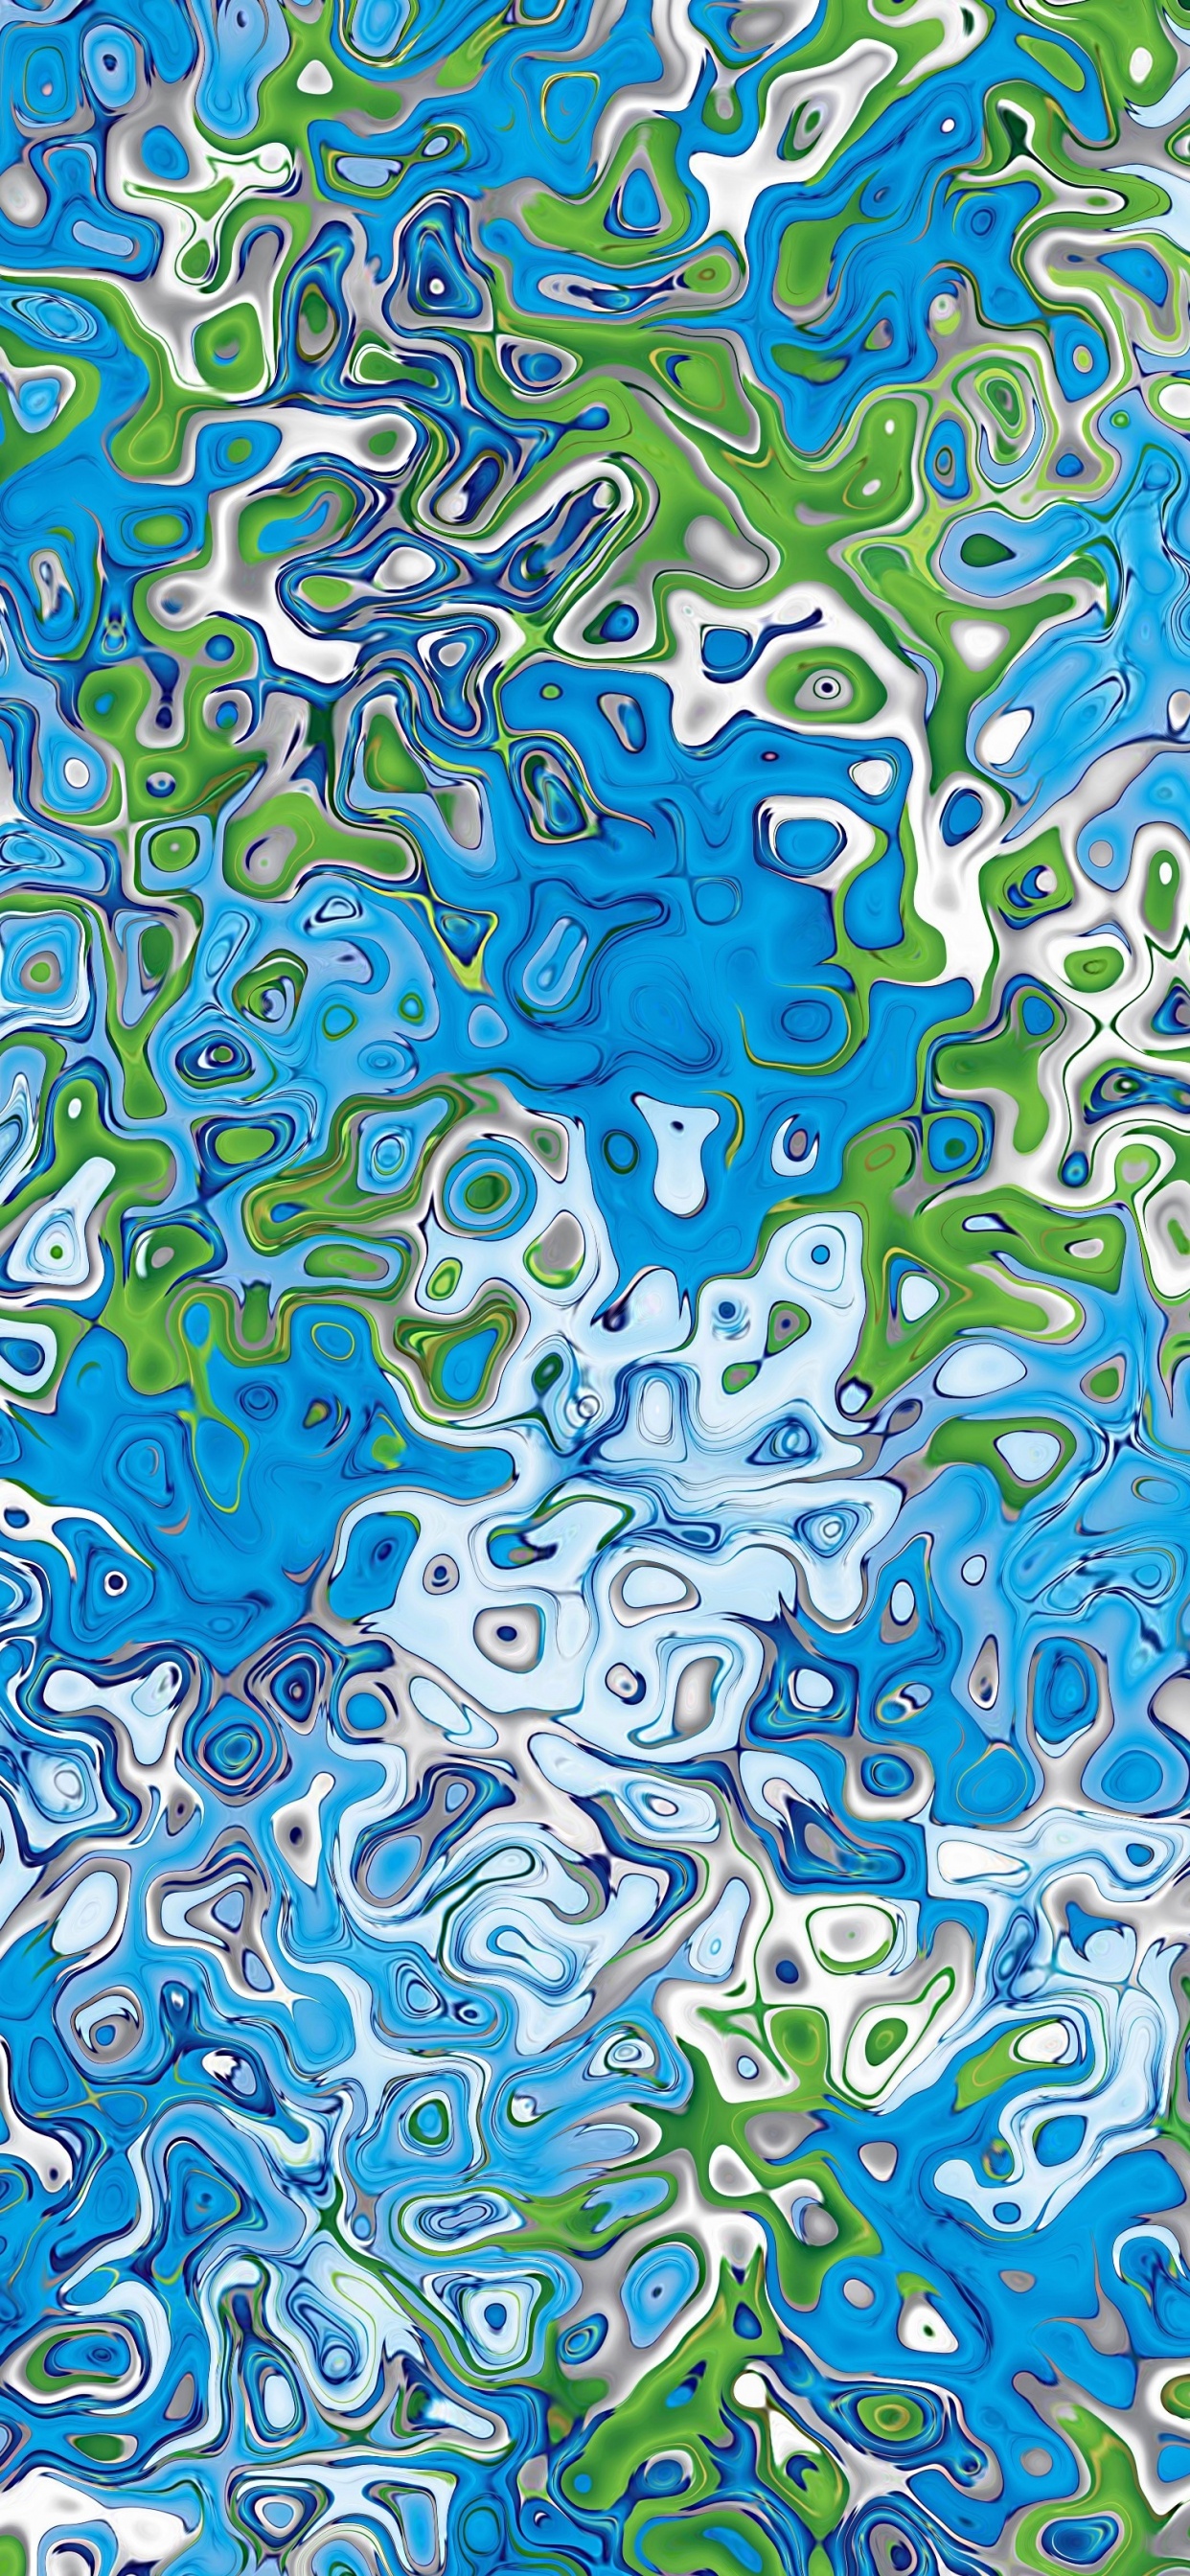 Green Blue and White Abstract Painting. Wallpaper in 1242x2688 Resolution